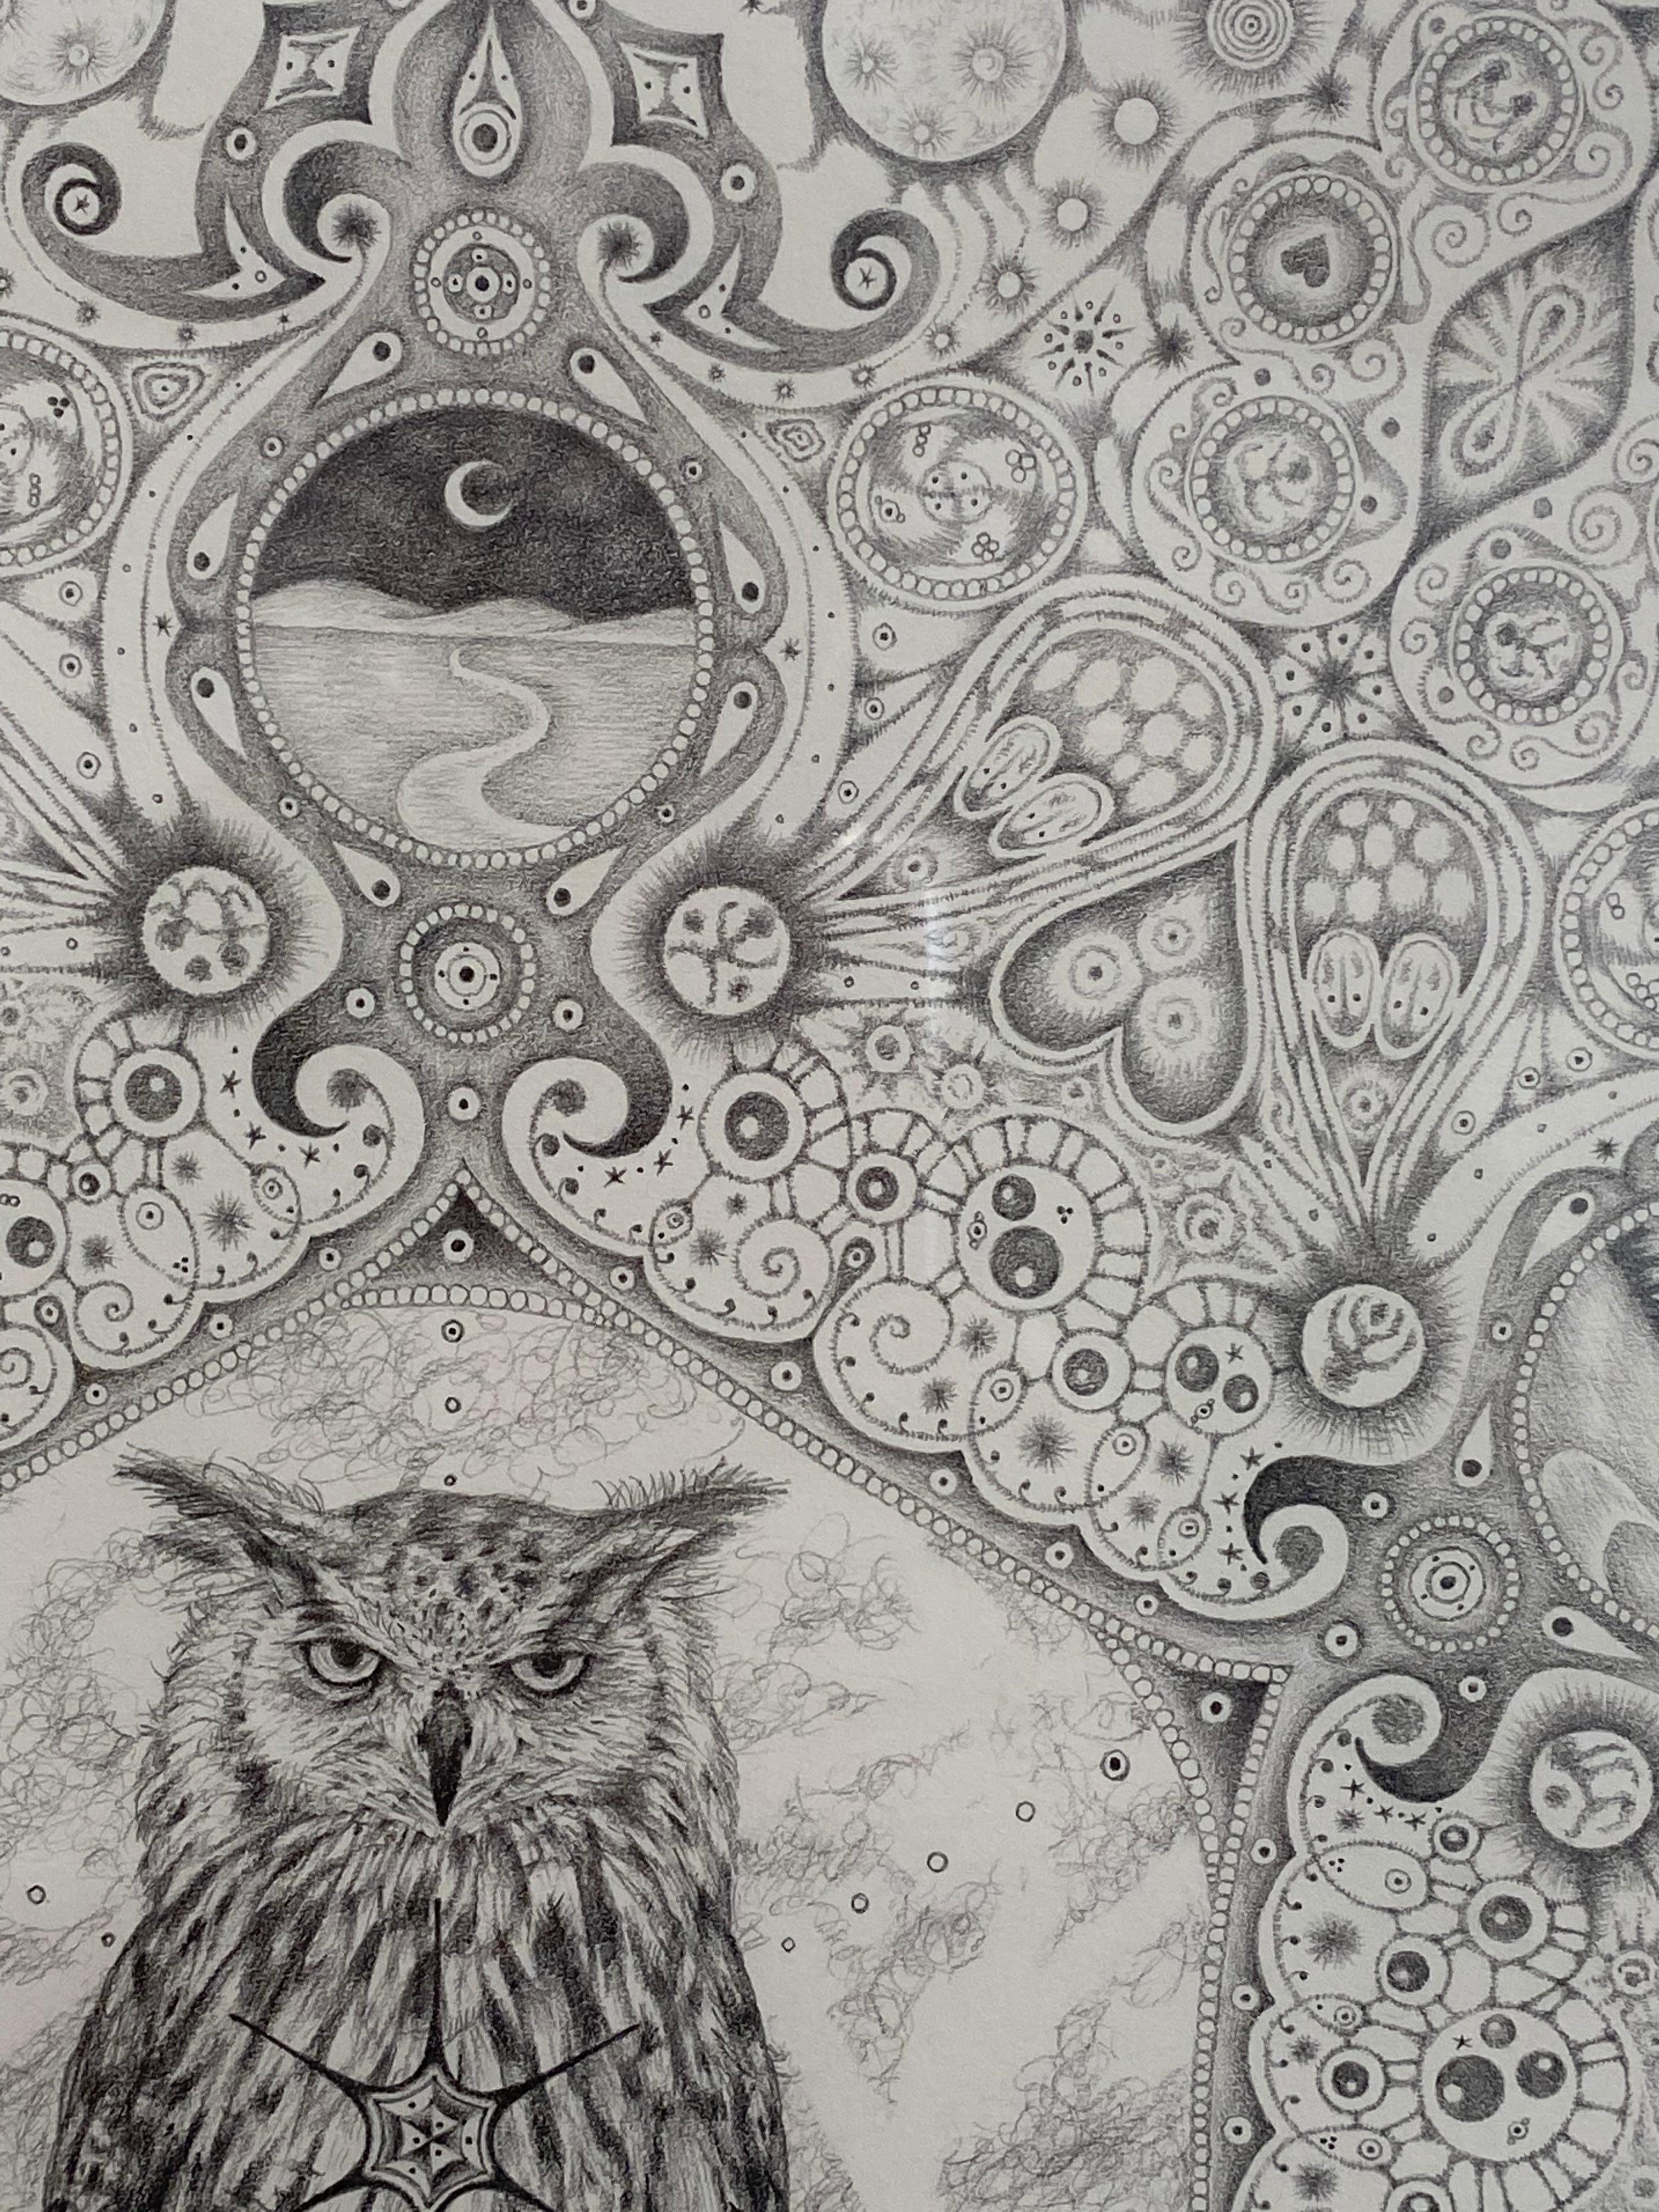 Snowflakes 84 Forester, Mandala Pencil Drawing, Owl, Cosmic Imagery, Landscapes For Sale 2